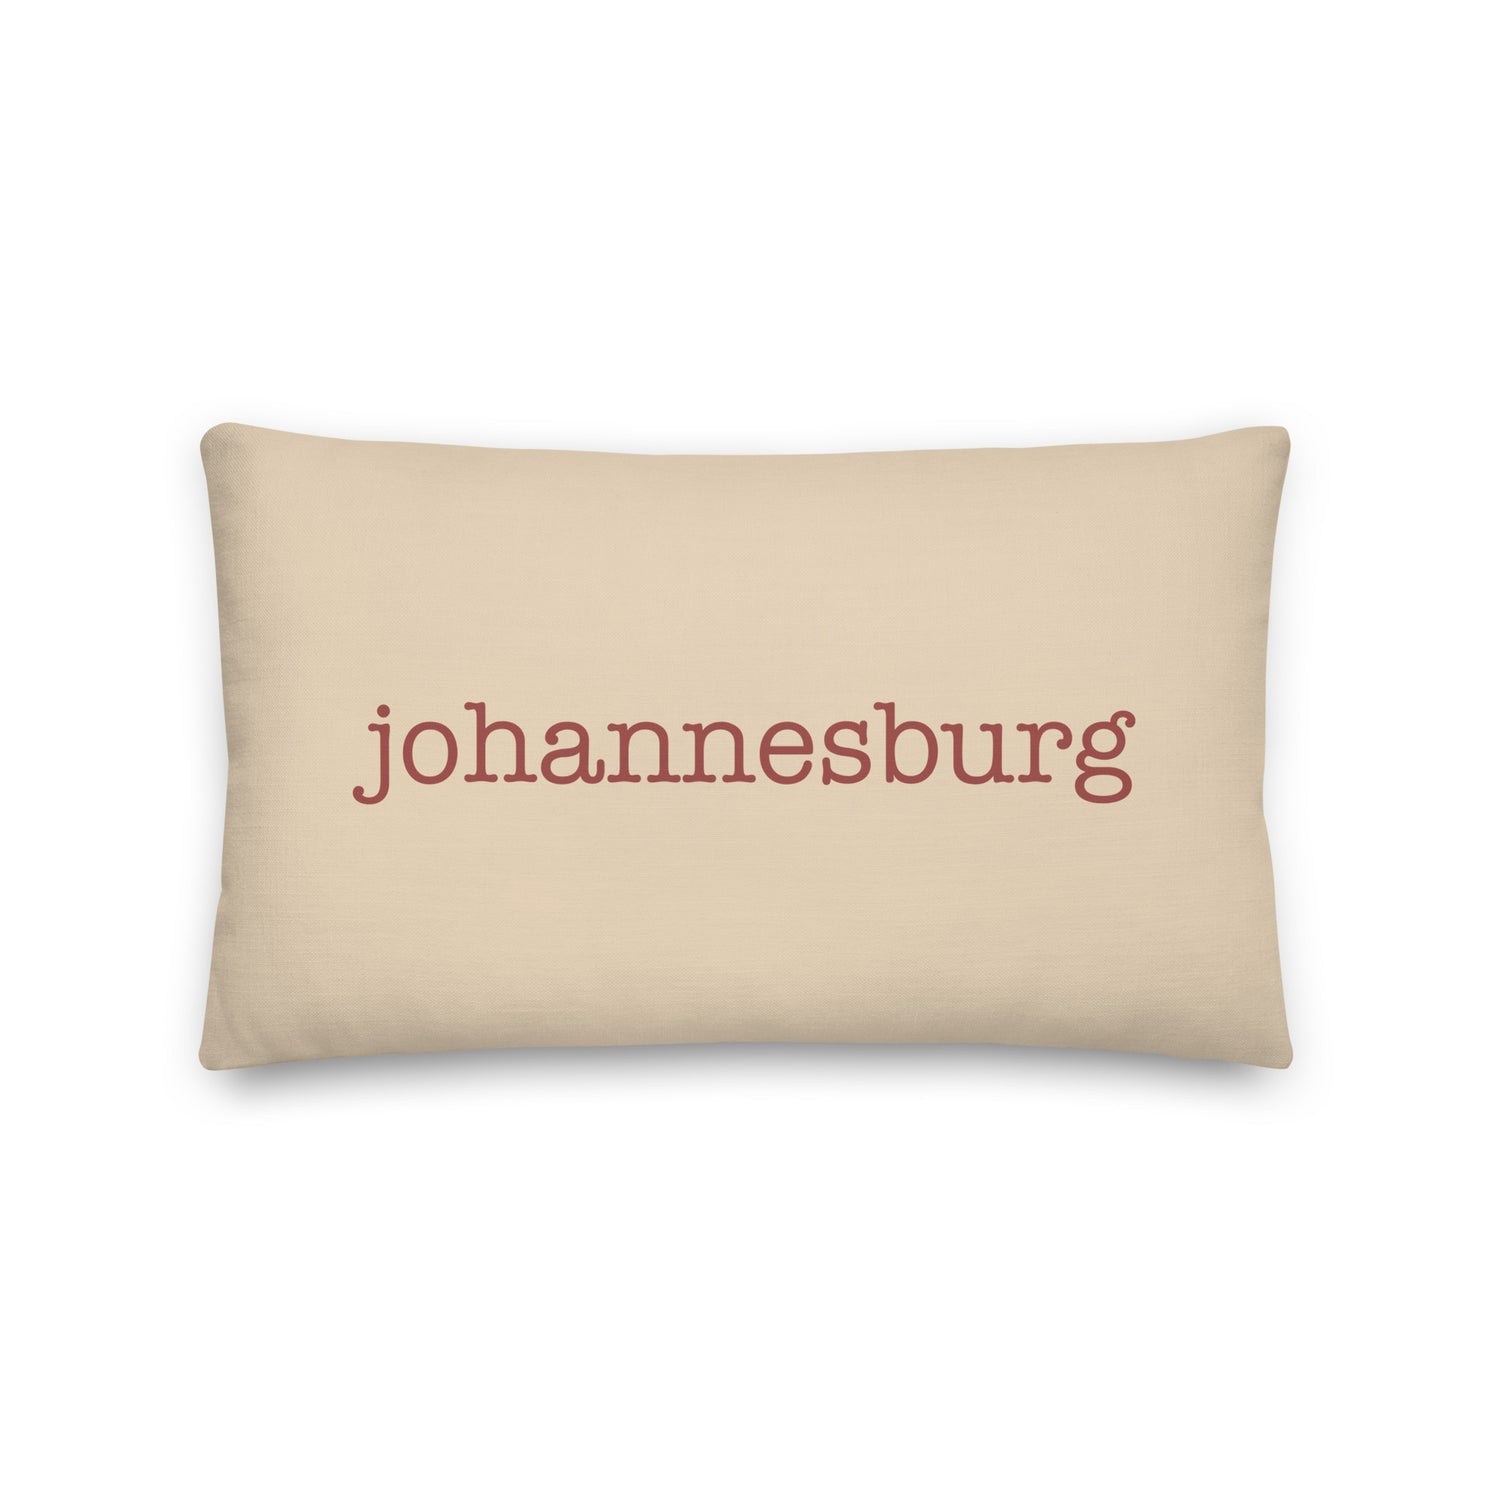 Johannesburg South Africa Pillows and Blankets • JNB Airport Code